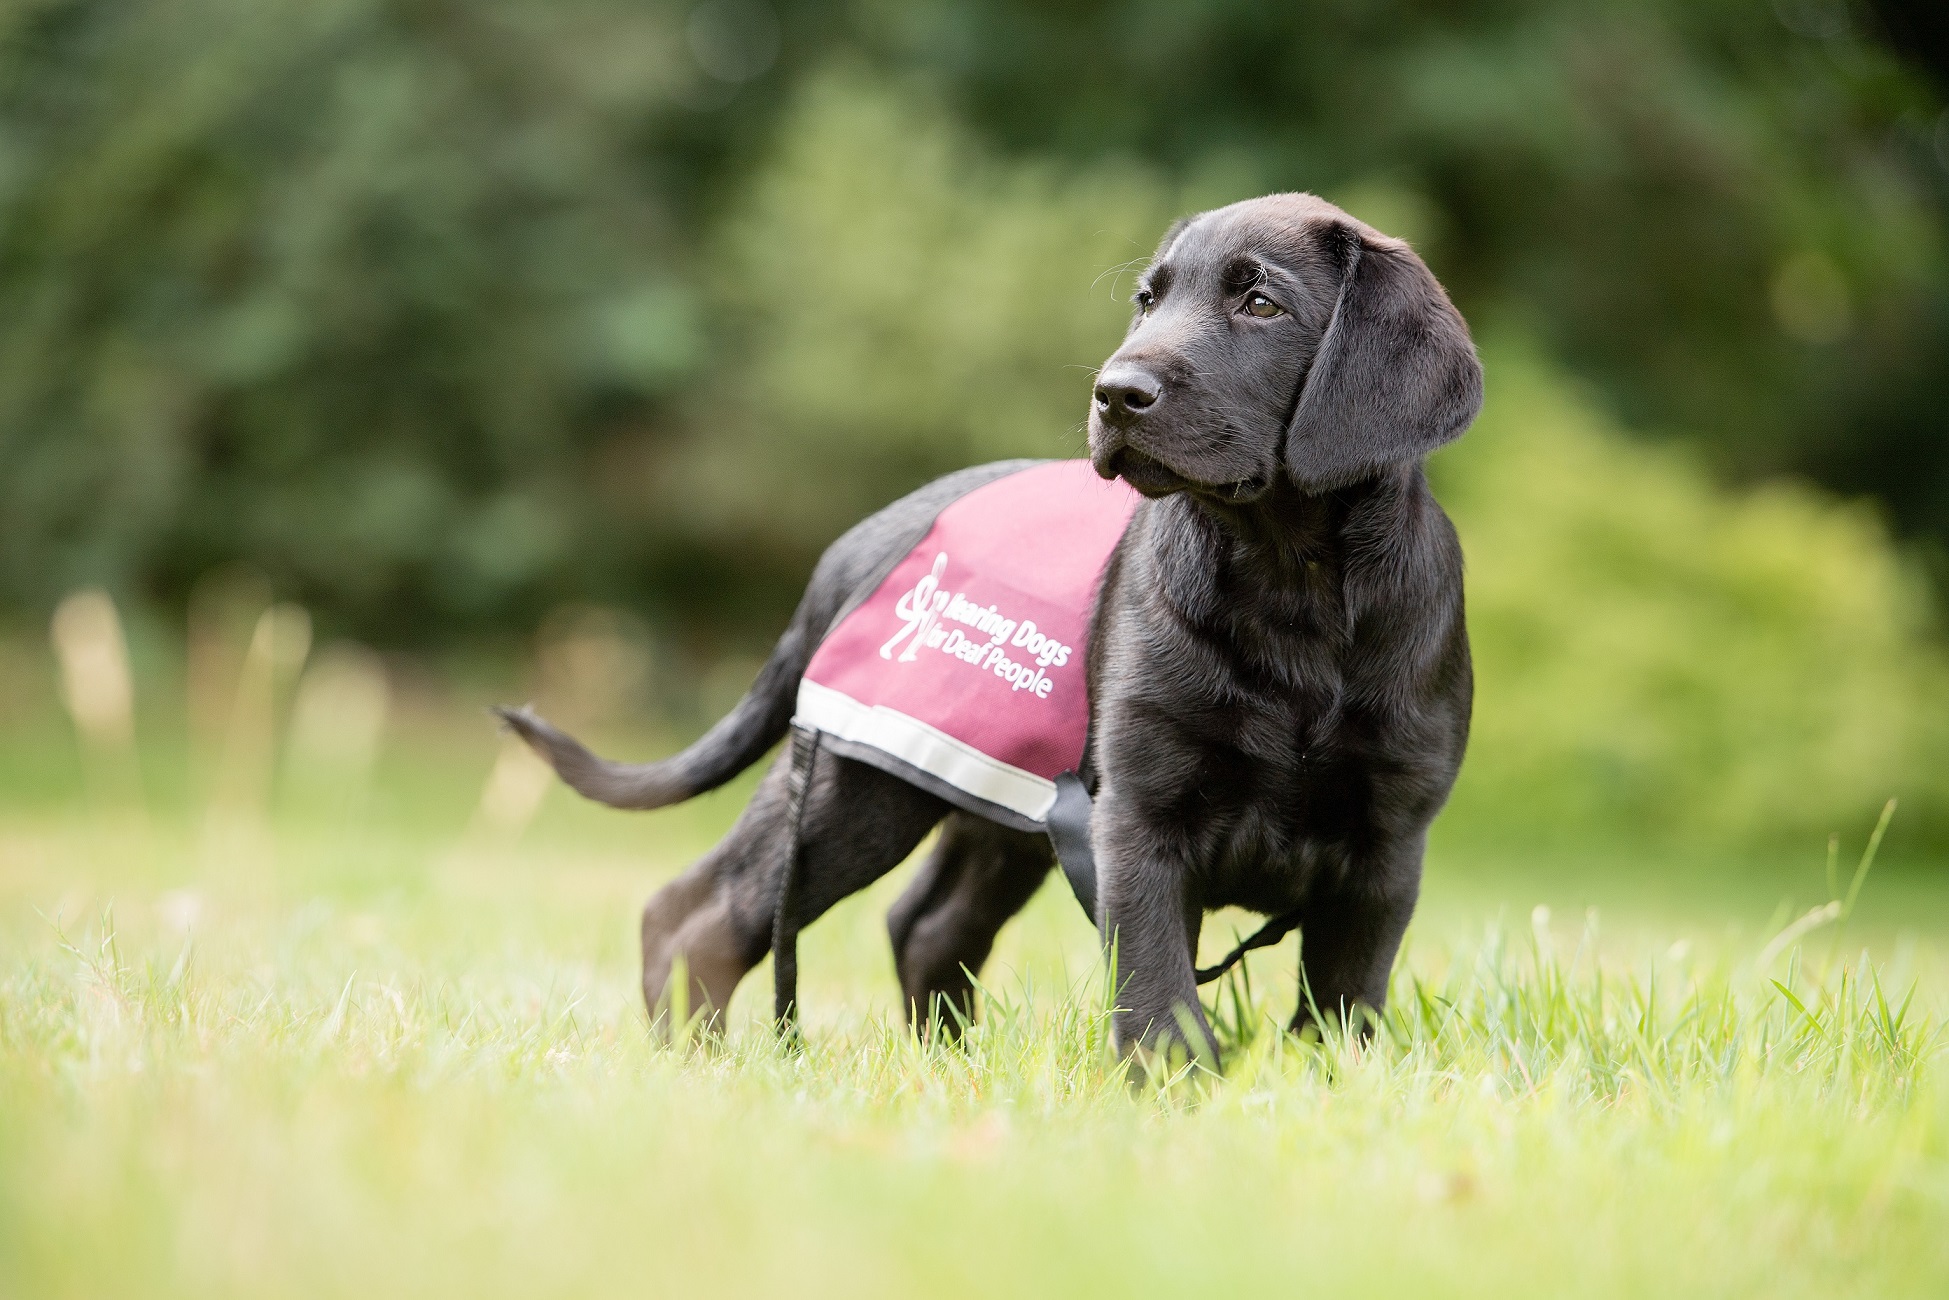 A black labrador puppy is standing in a field, looking off-camera to the left. The puppy has a pink vest on, which is too big. The vest features the Hearing Dogs for Deaf People logo.